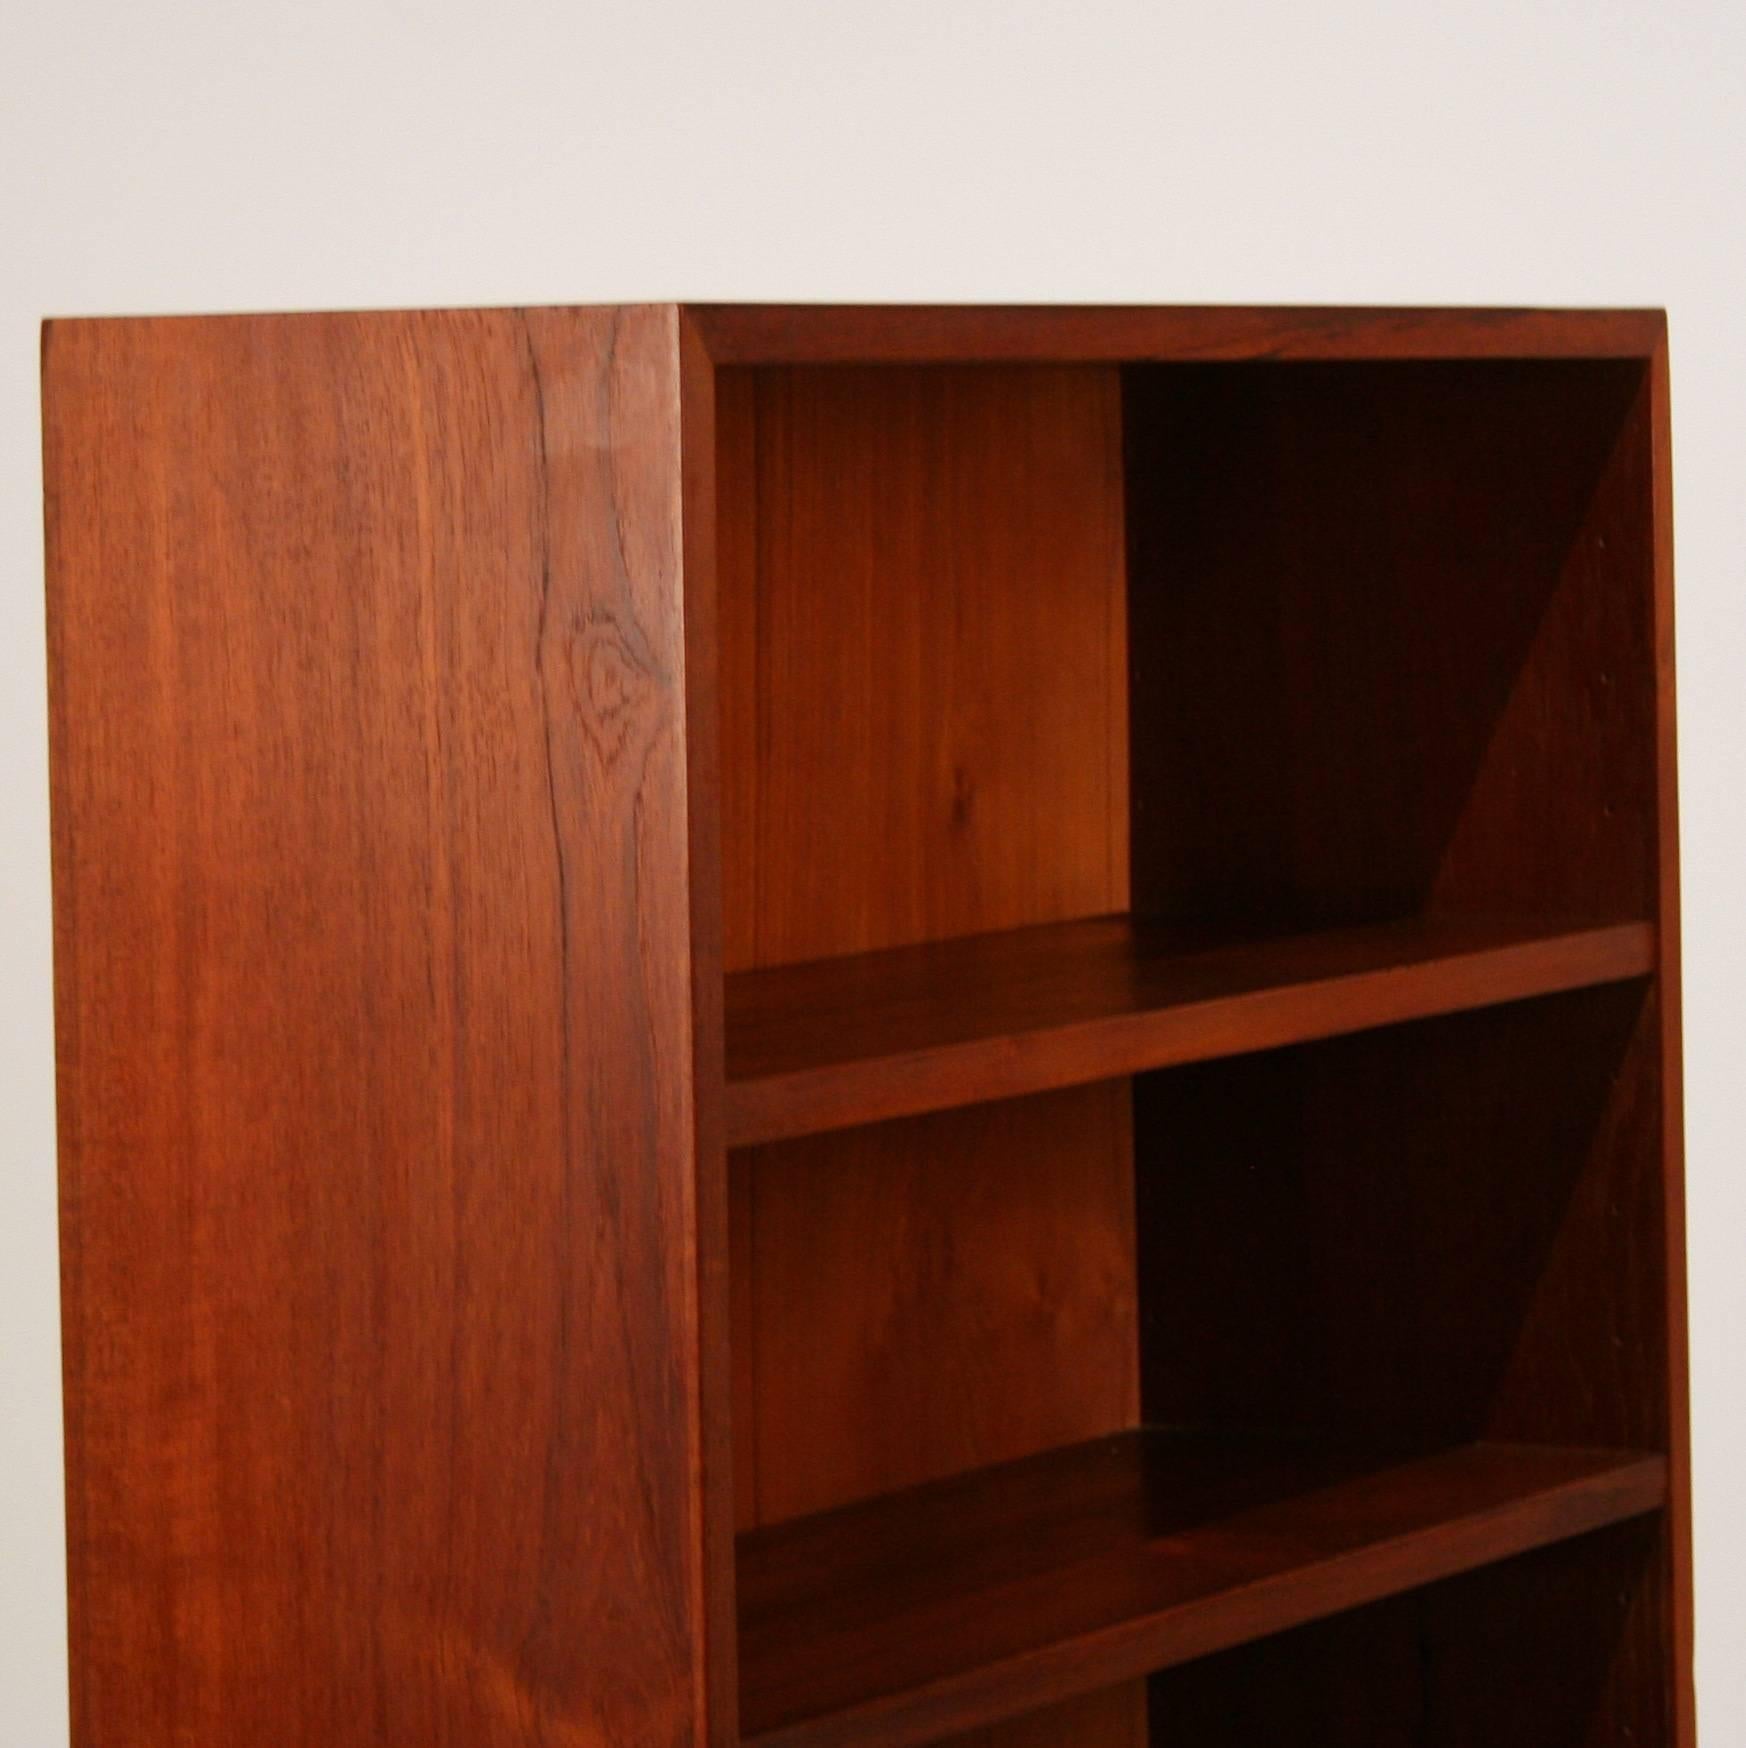 Wonderful small-scale vintage Danish teak bookcase with skirt base. Perfect for that small office space and great for wall mounting. Features two adjustable shelves. Made in Denmark.
 